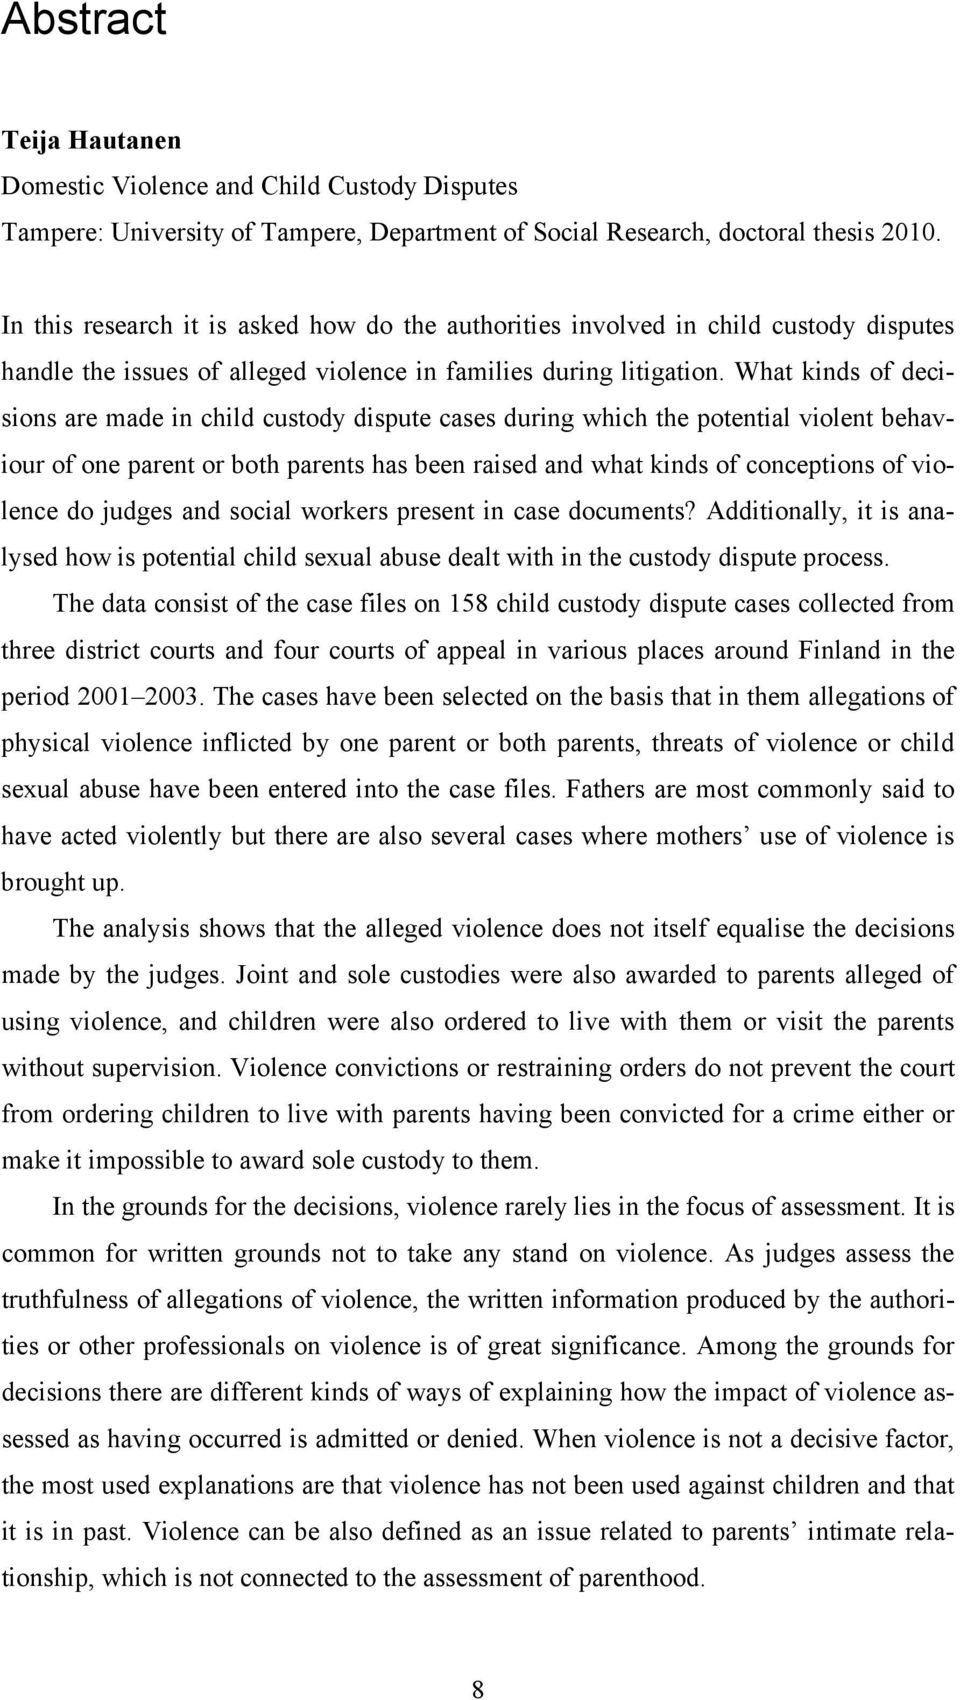 What kinds of decisions are made in child custody dispute cases during which the potential violent behaviour of one parent or both parents has been raised and what kinds of conceptions of violence do